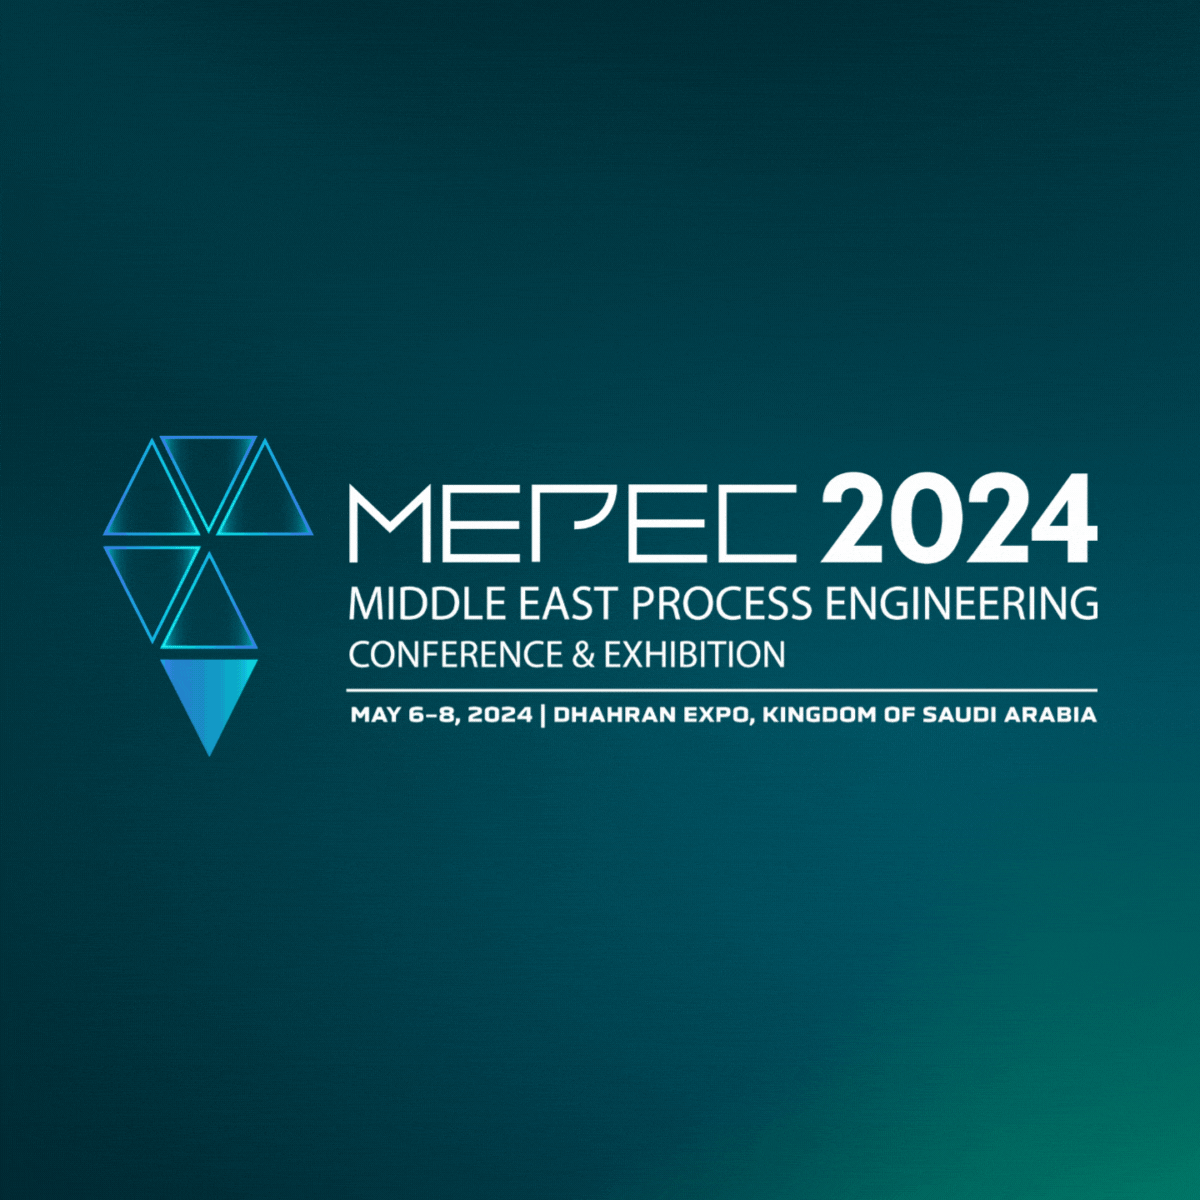 Middle East Process Engineering Conference & Exhibition 2024